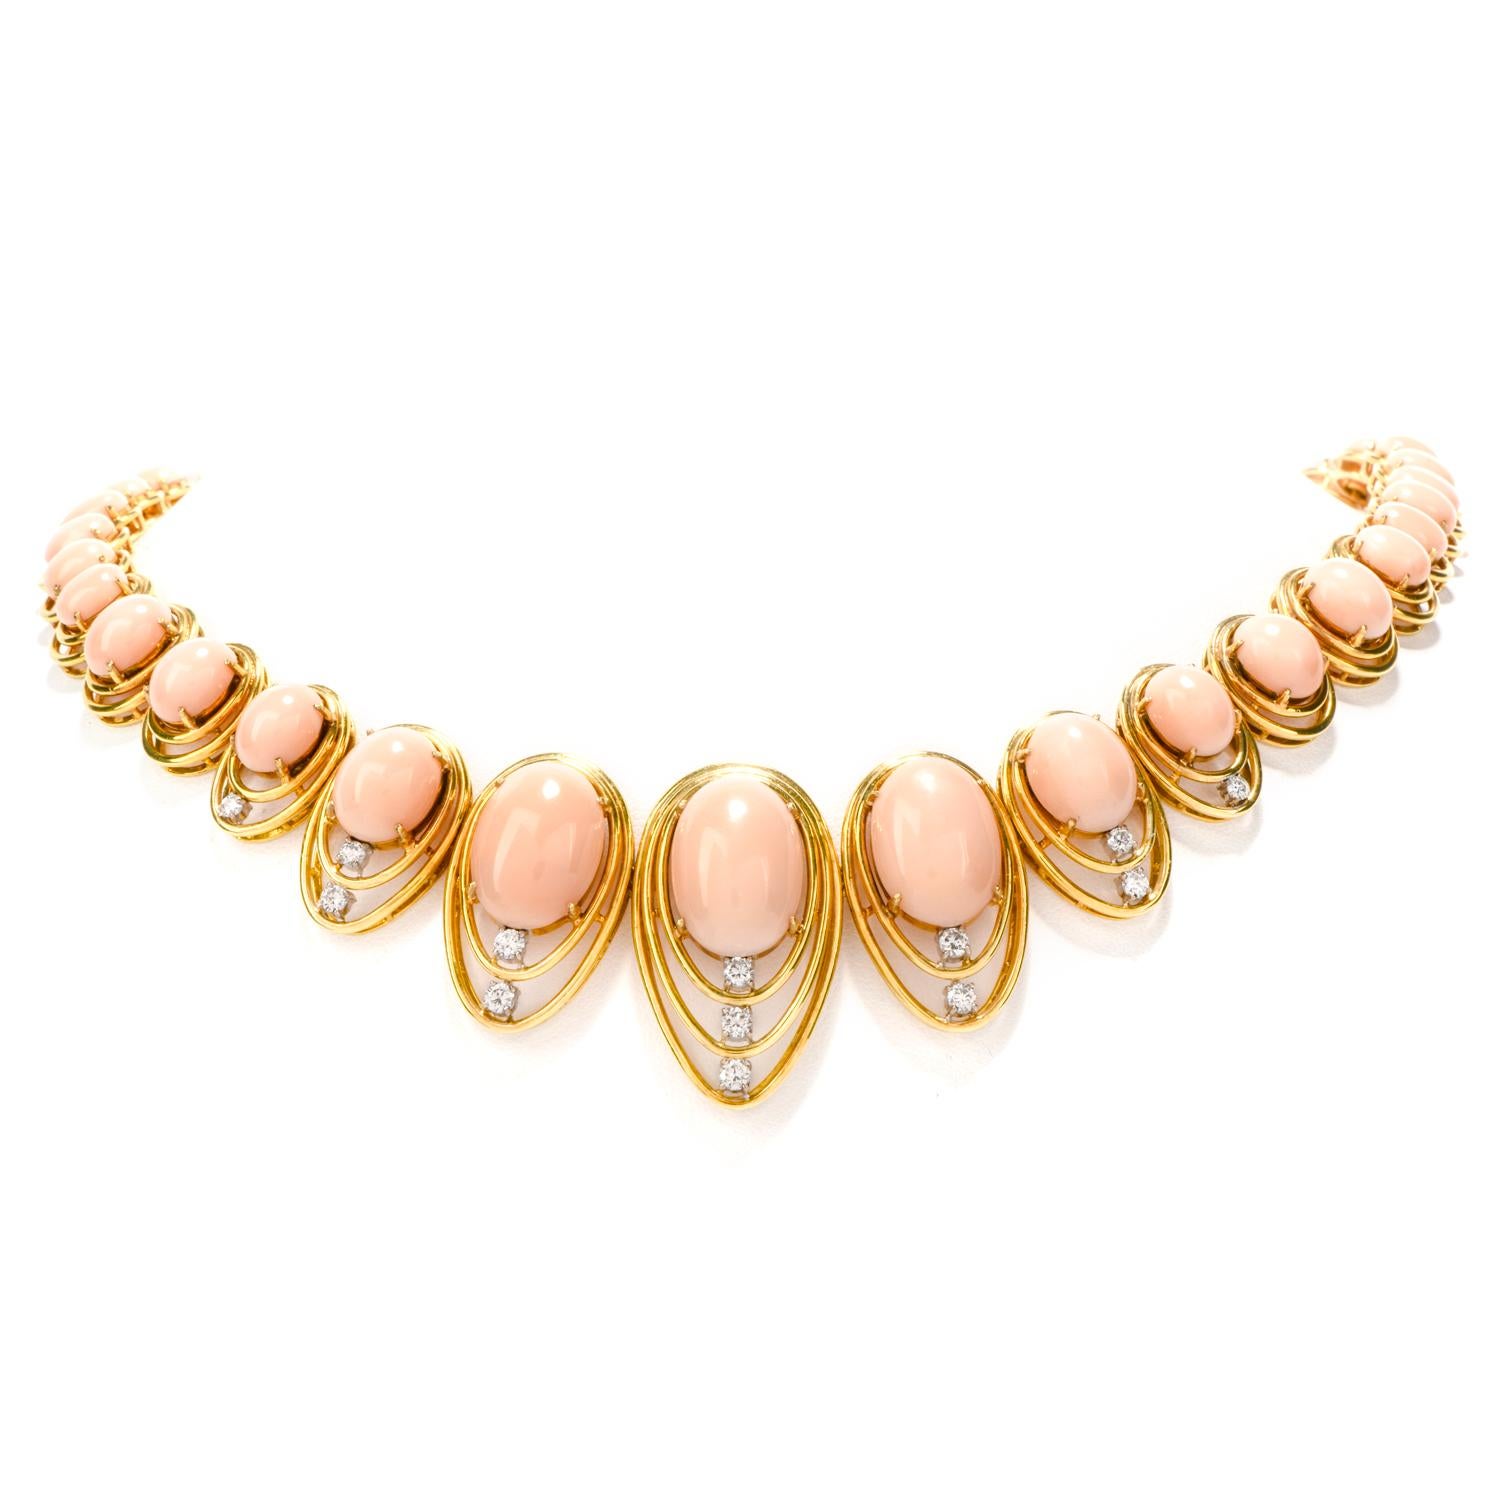 Exude classiness with this exceptional  Vintage 1970's Diamond Coral 14K Gold Oval Graduated Necklace! 
This necklace has 42 natural soft natural pink coral oval cabochons from 18mm to 8 mm long and 13 genuine, round cut diamonds, totaling 0.85